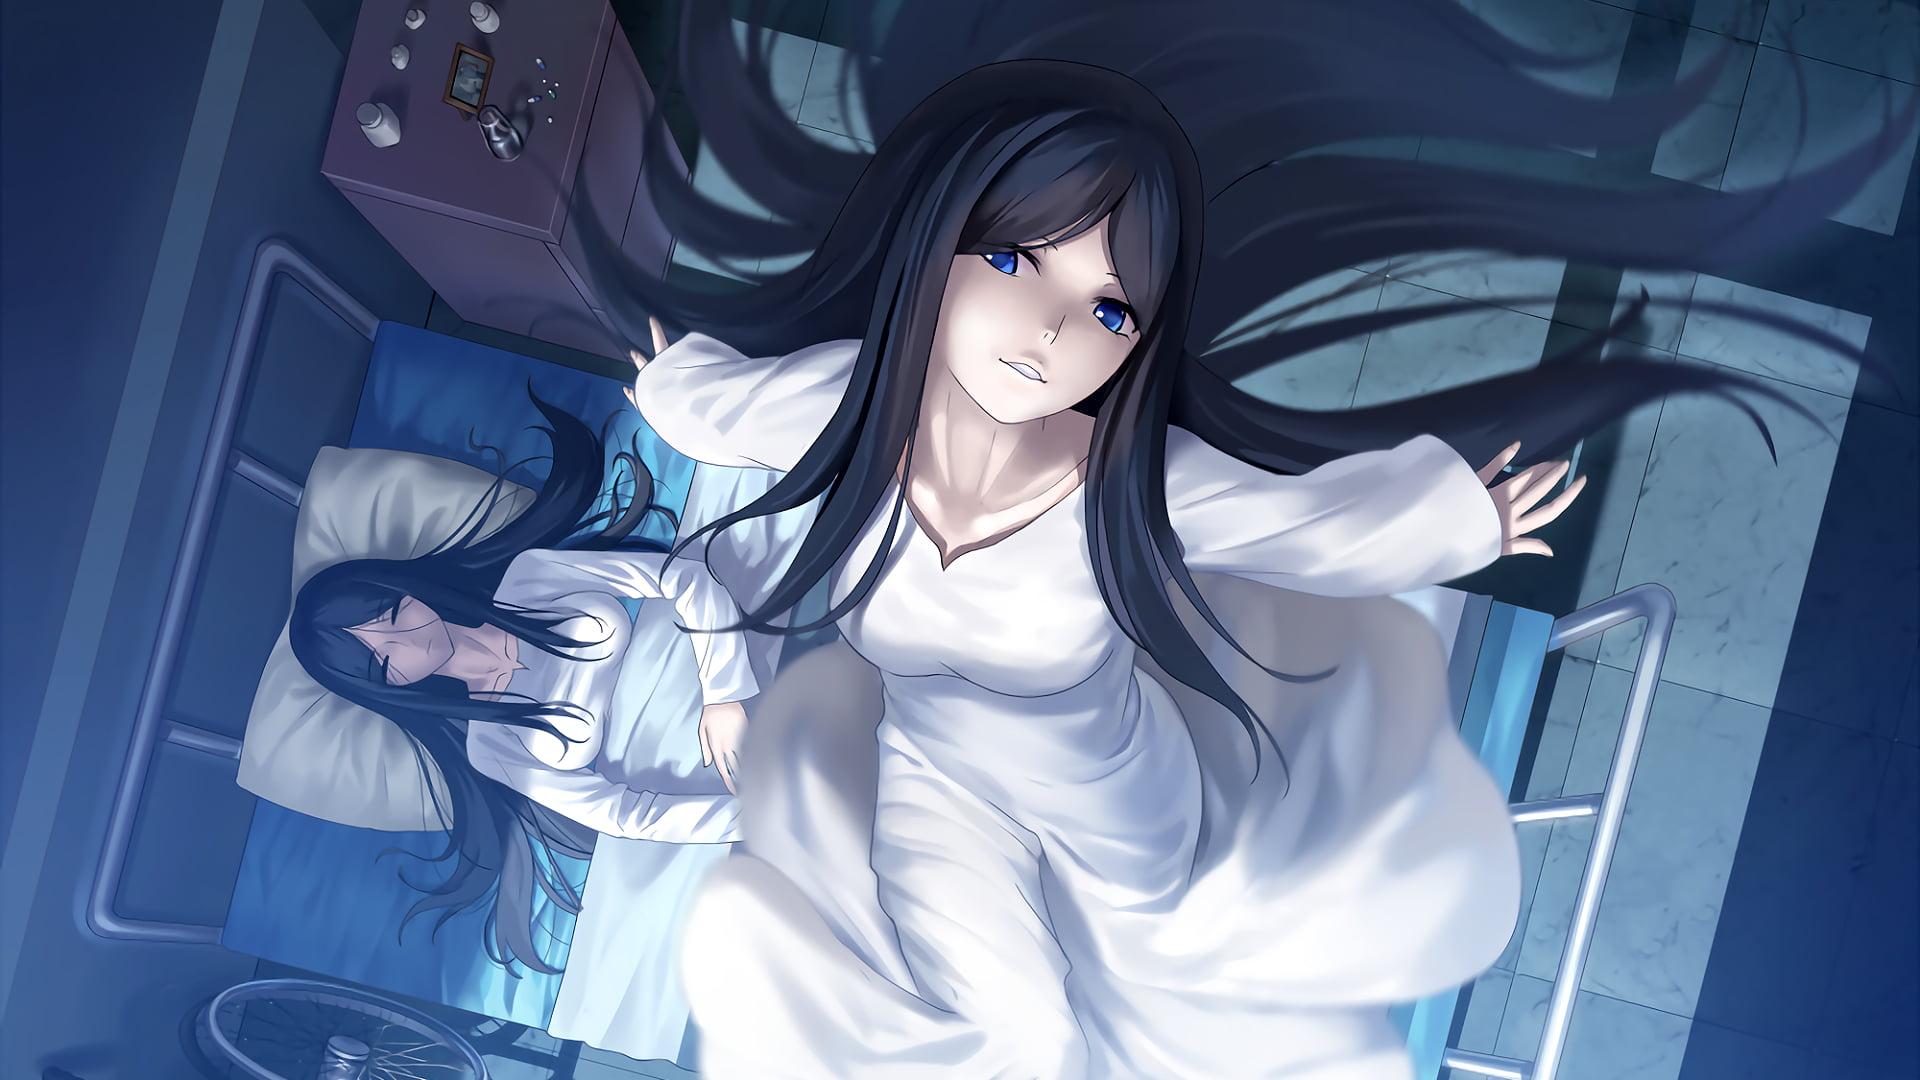 Black Haired Female Anime Character With White Long Sleeved Dress